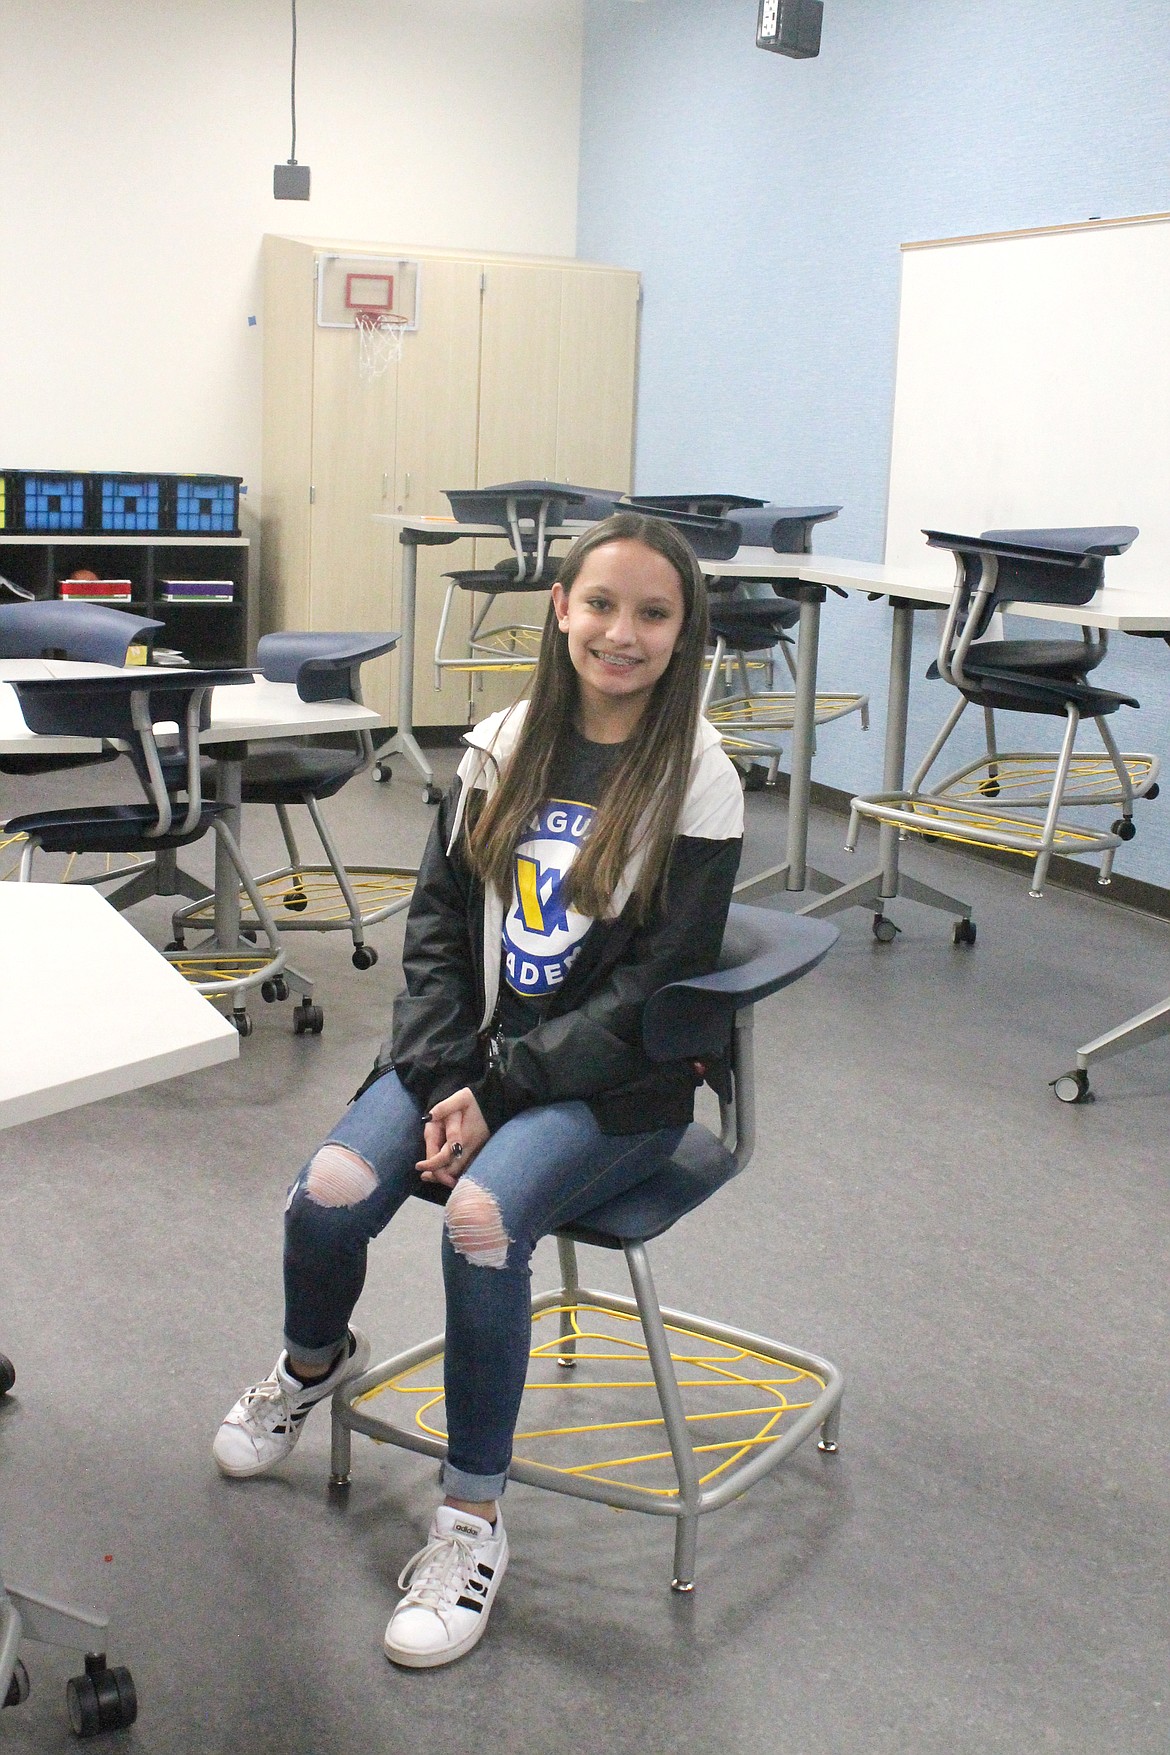 Vanguard student and tour guide Alyssa Wassink demonstrates a special chair available at the school for students who have difficulty sitting still.